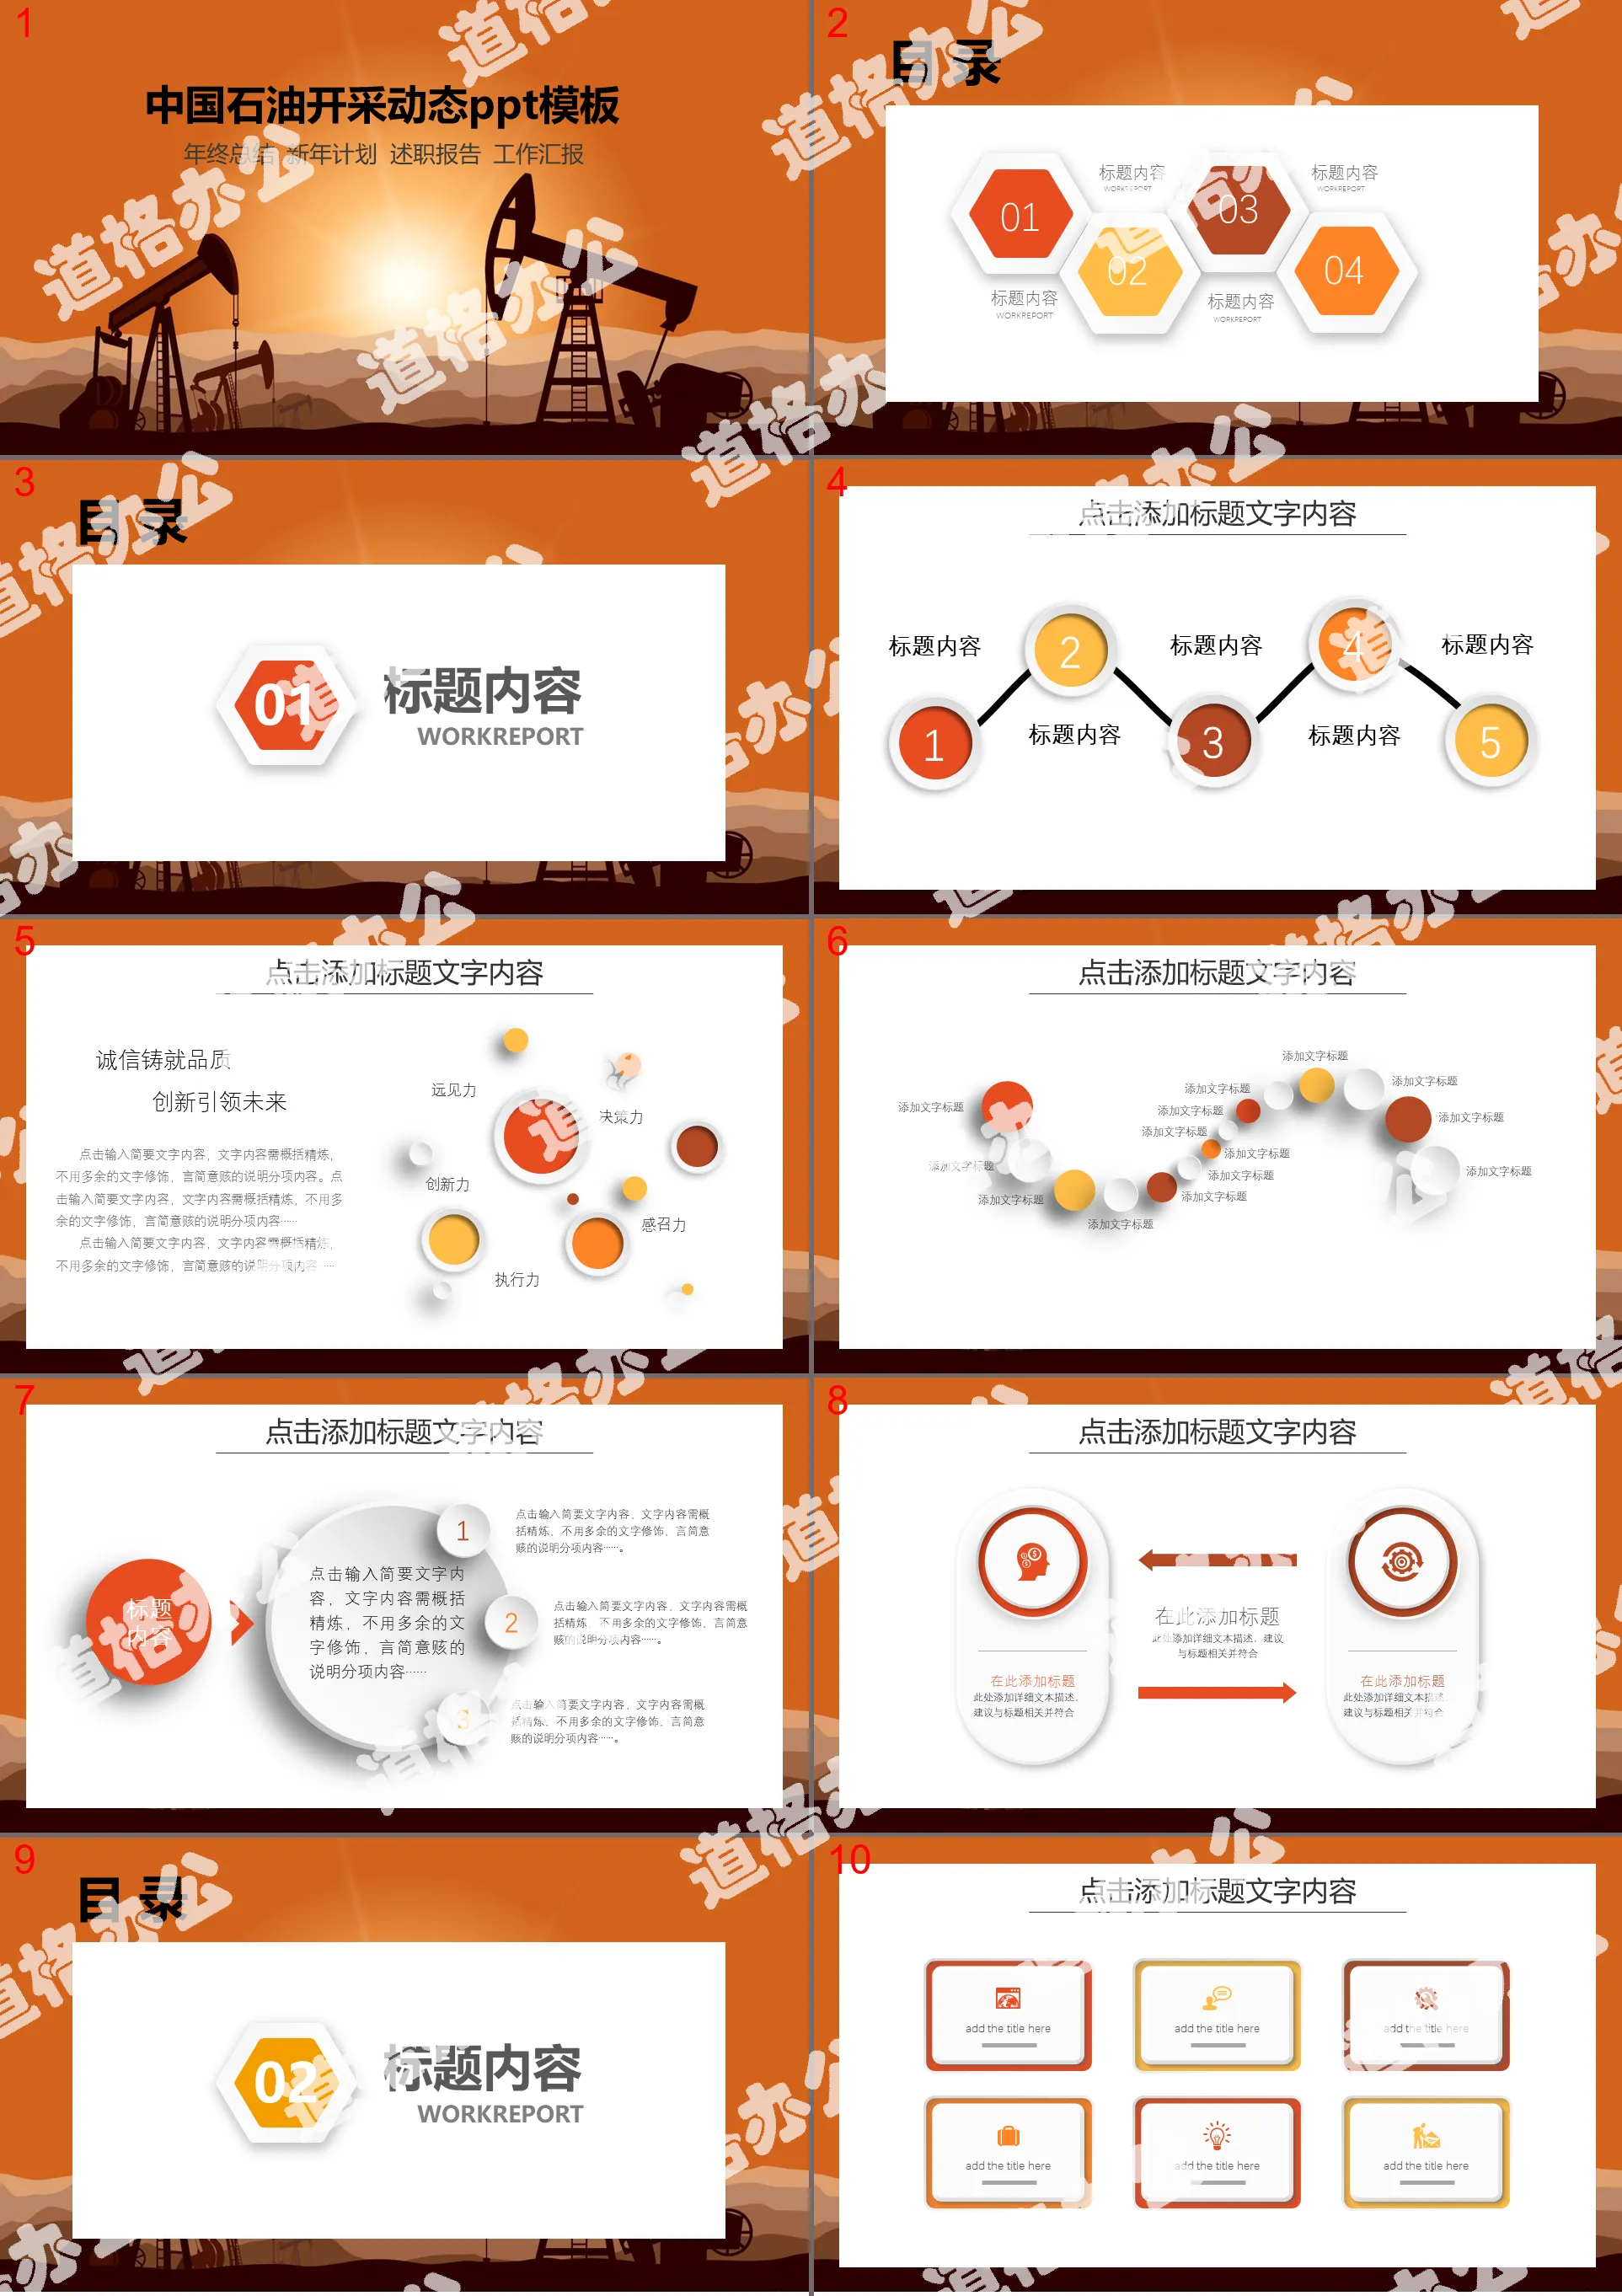 Oil field oil extraction PPT template